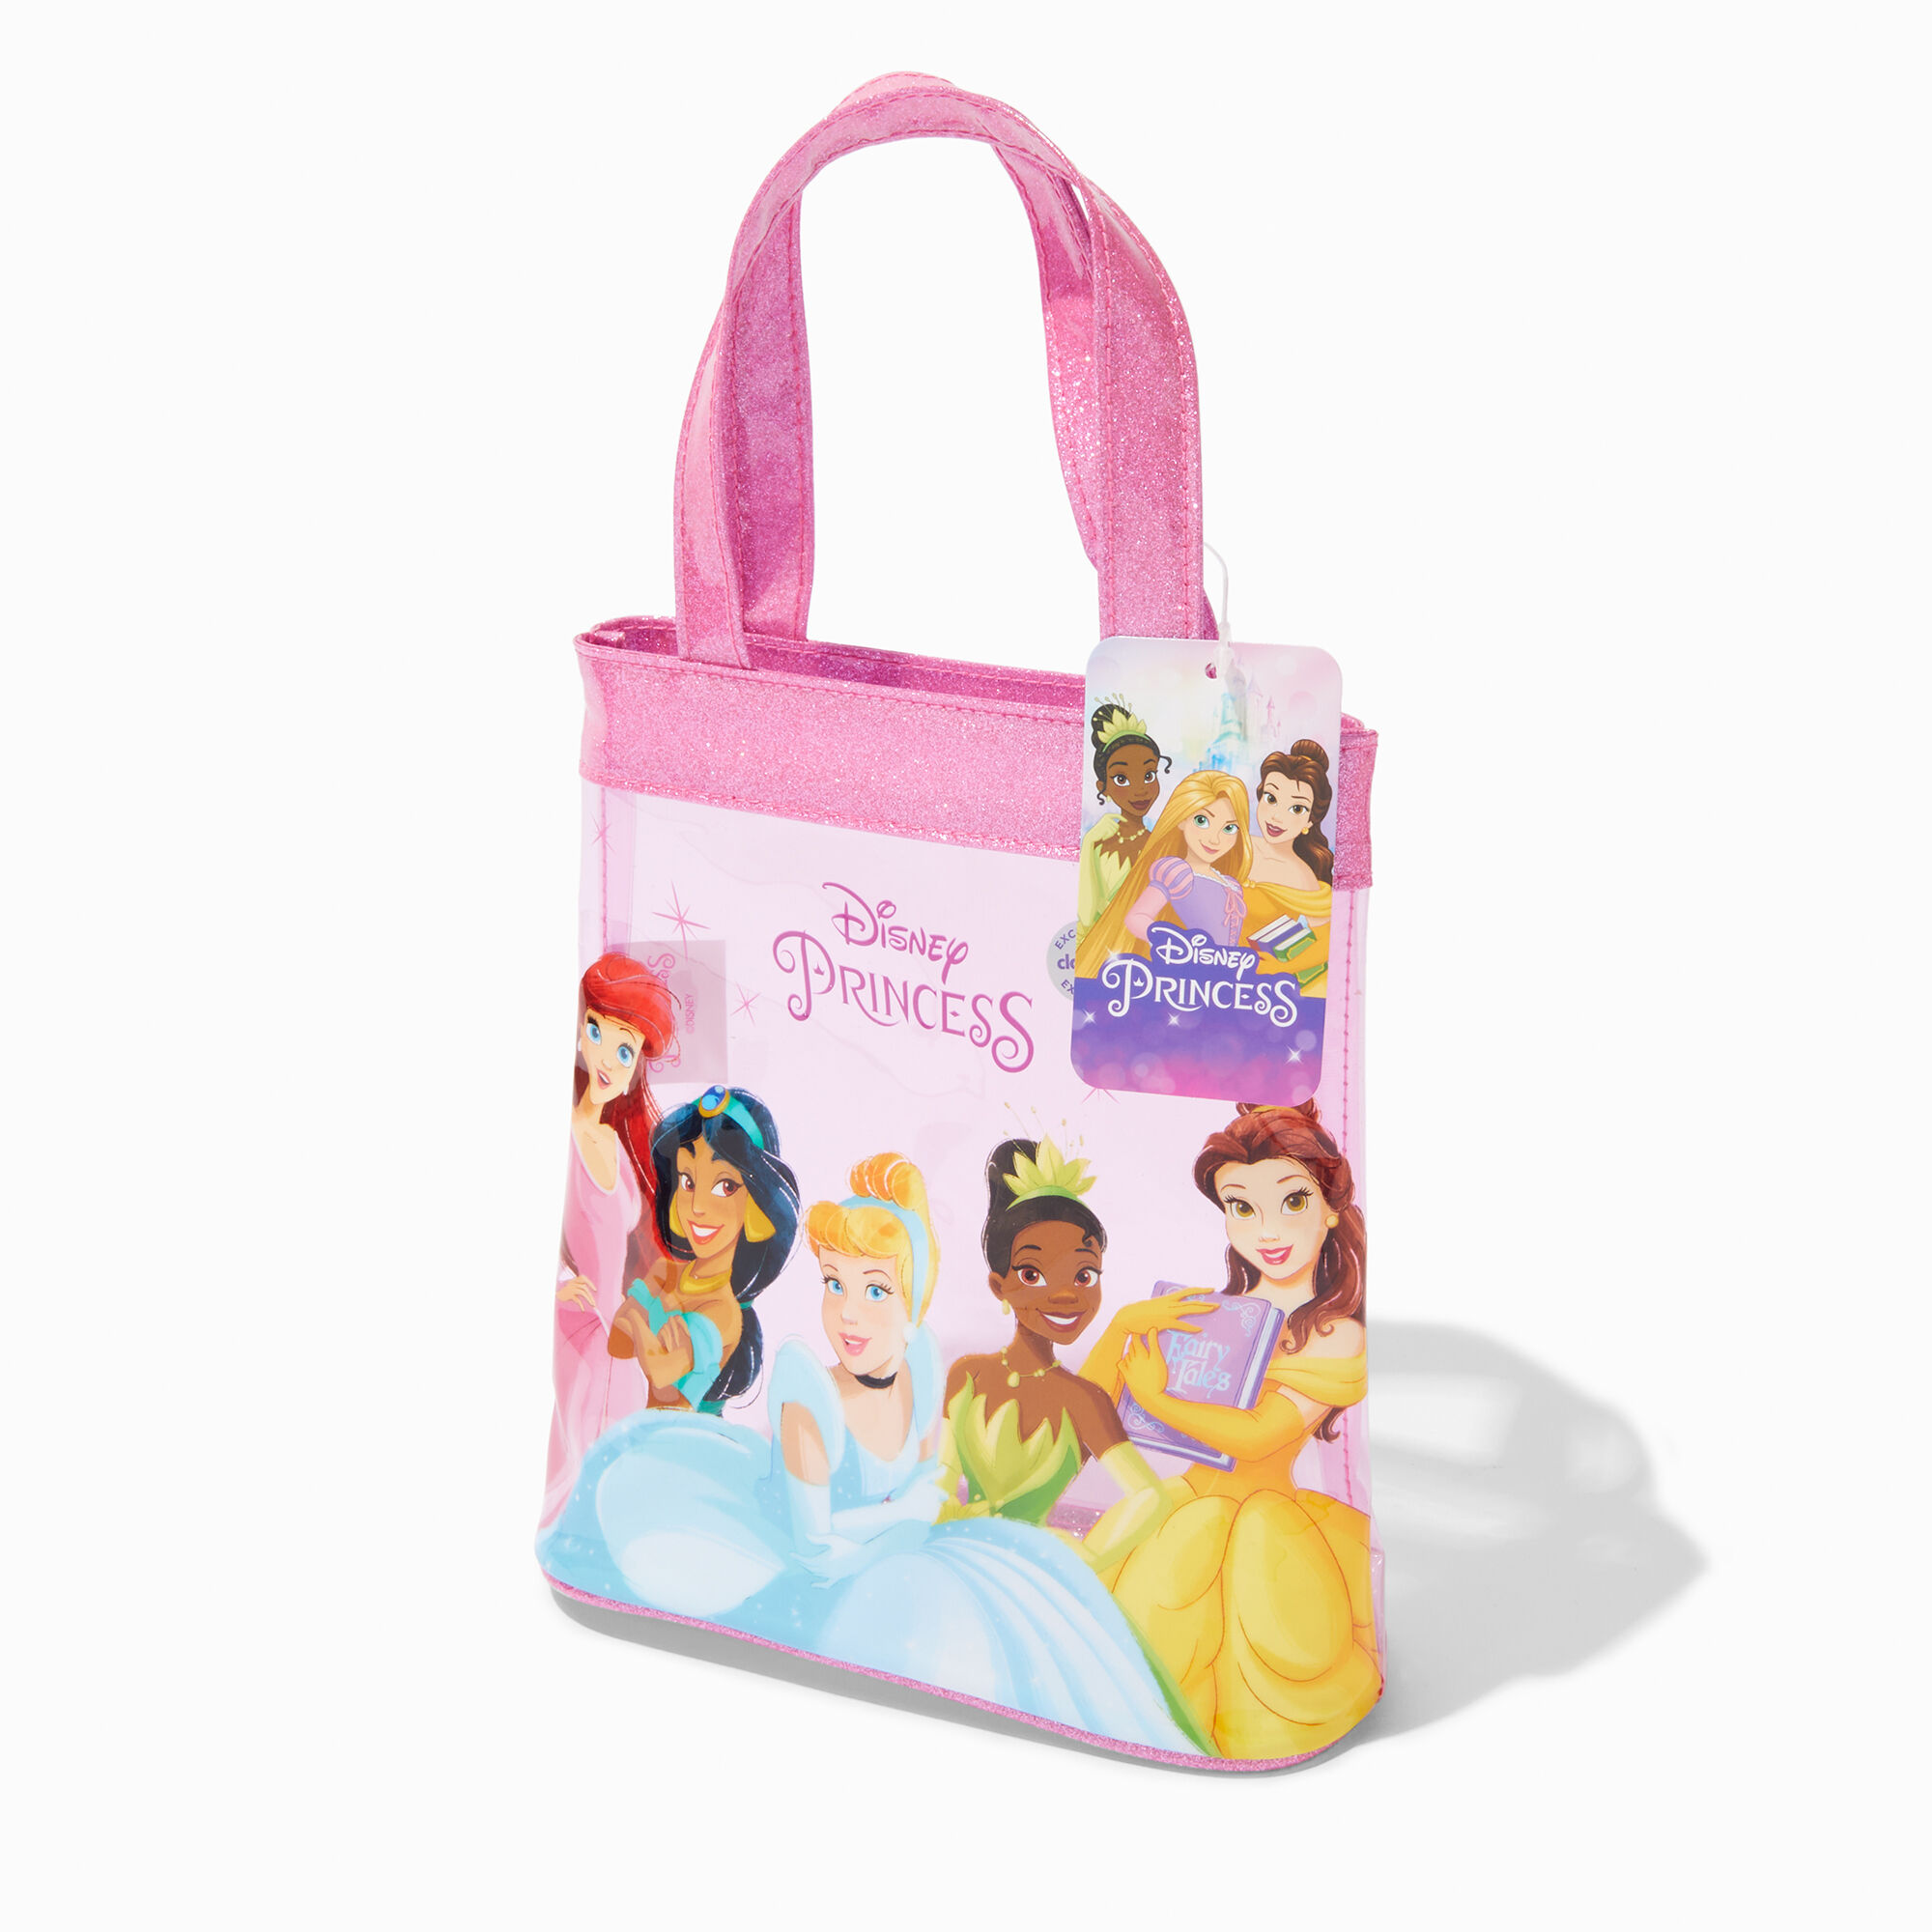 View Disney Princess Claires Exclusive Jelly Tote Bag information